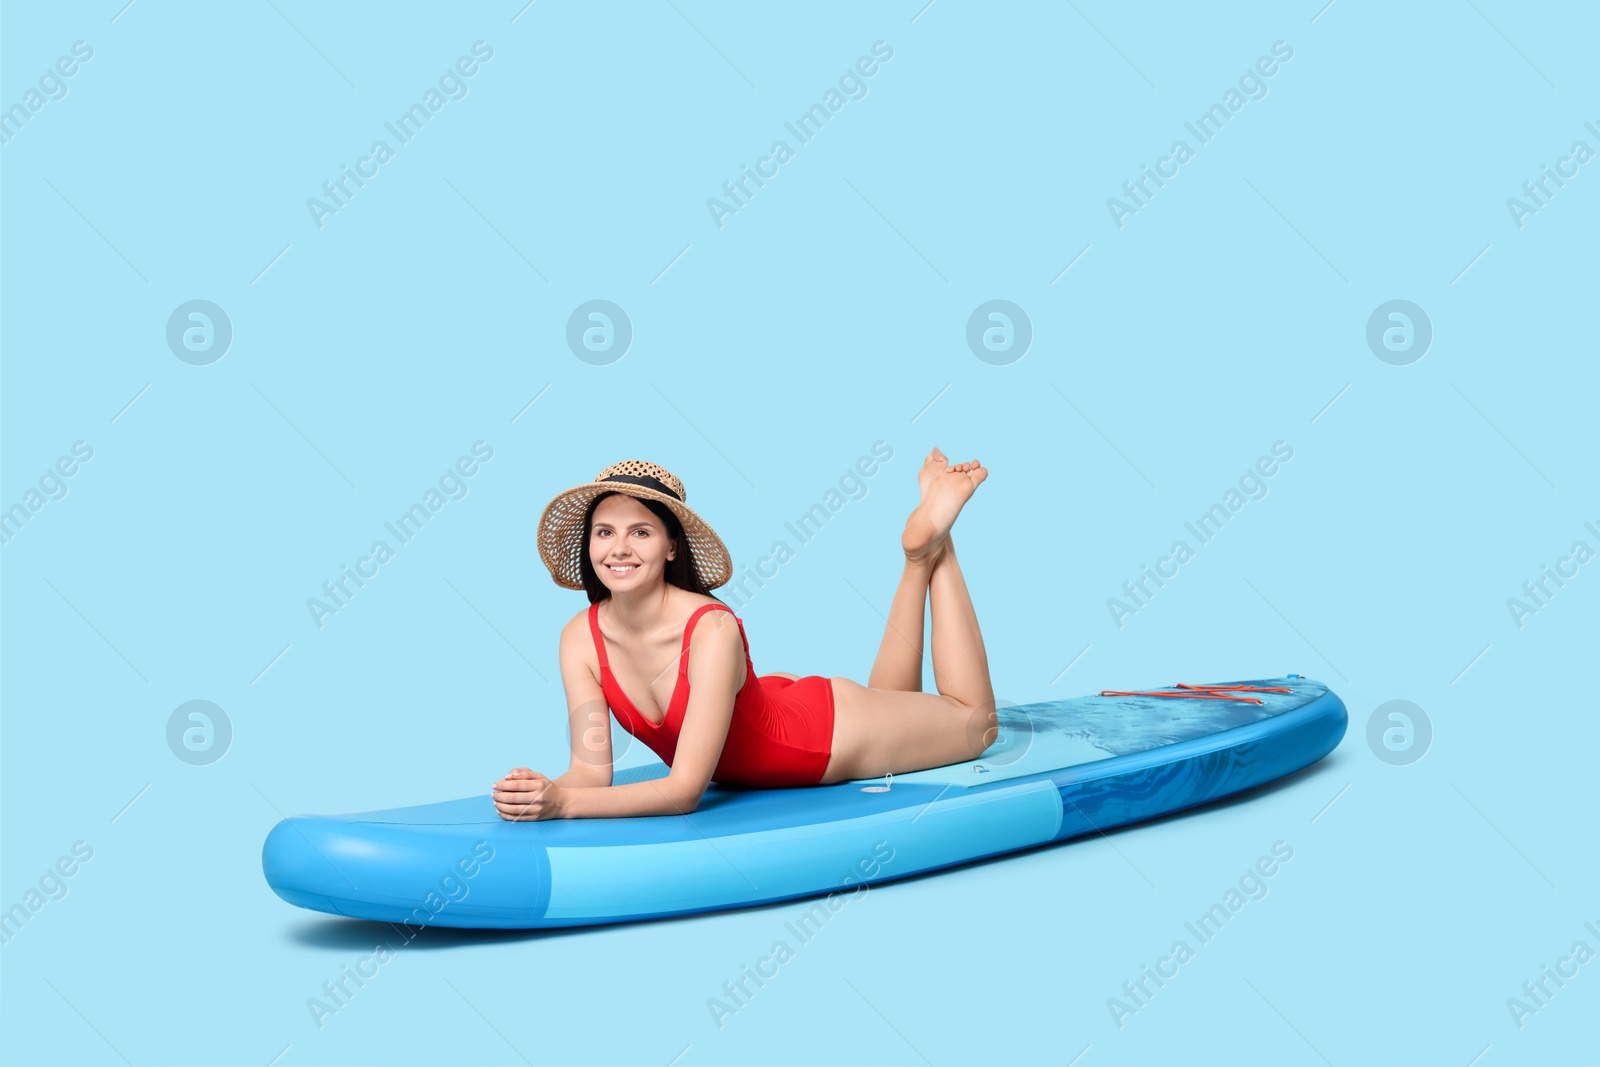 Photo of Happy woman resting on SUP board against light blue background